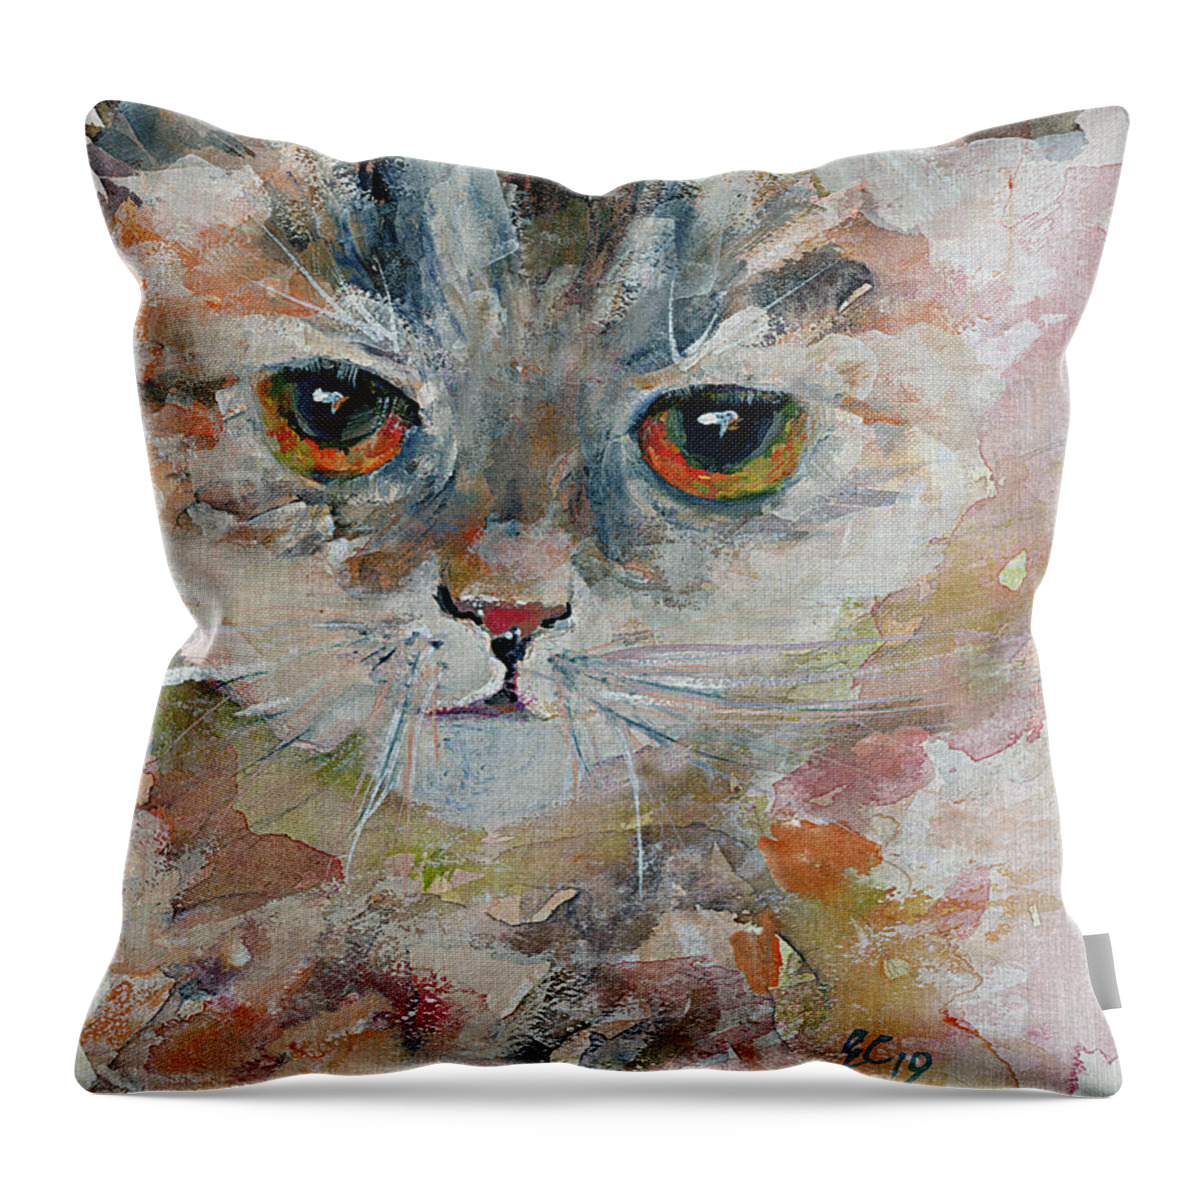 Cats Throw Pillow featuring the painting Kitten Portrait by Ginette Callaway